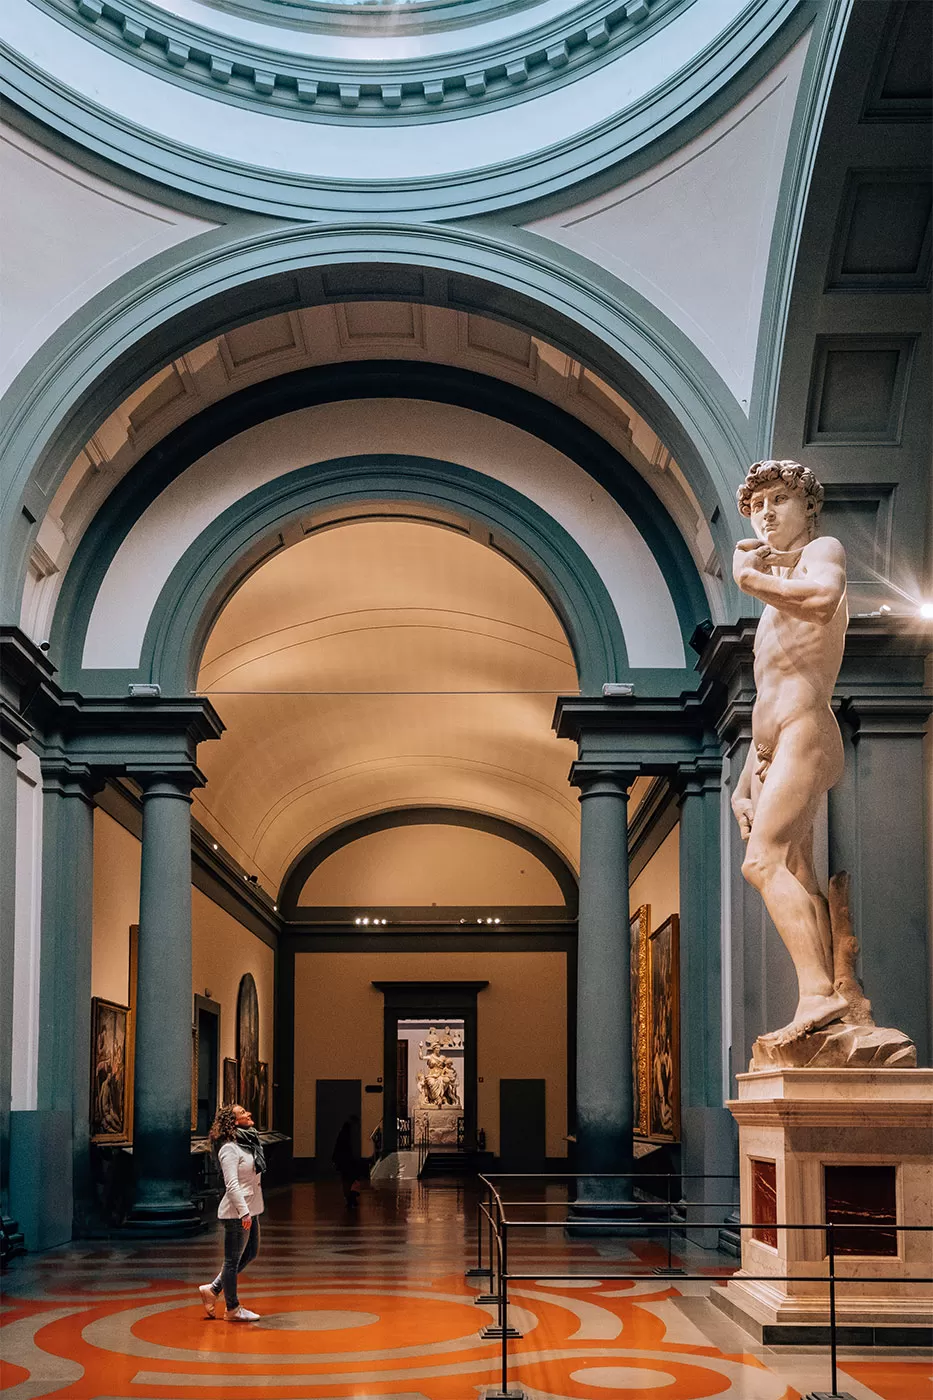 Where to Stay in Florence - Galleria dell'Accademia Statue of David and Michele